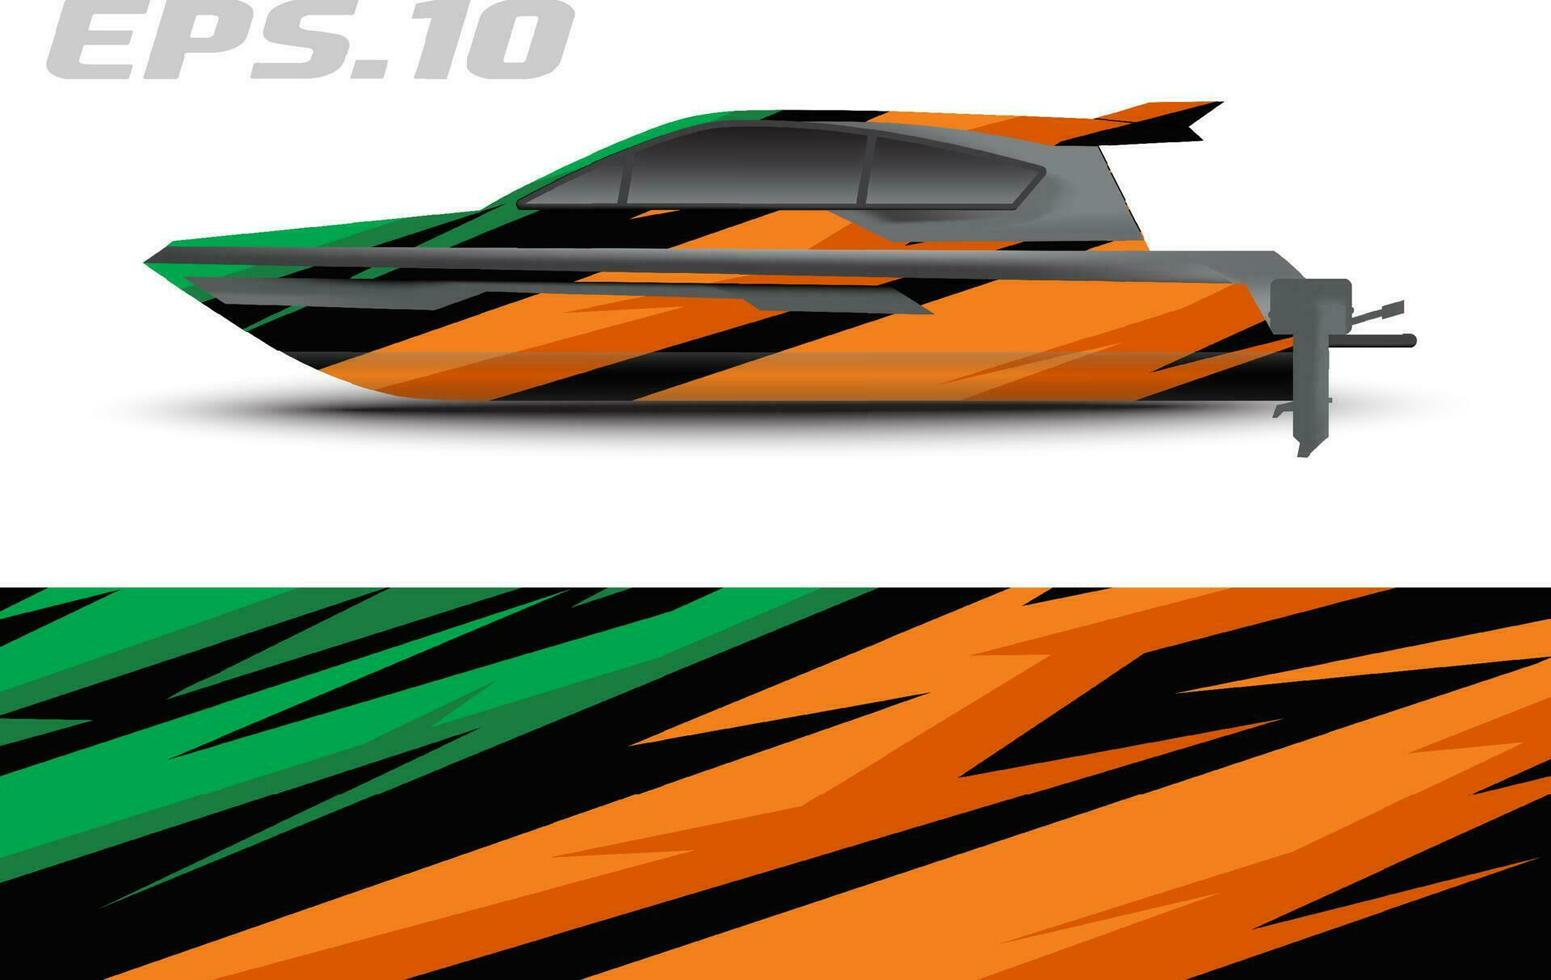 Boat livery vector graphics. Abstract racing background design for car, motorcycle and other vehicle sticker wrap